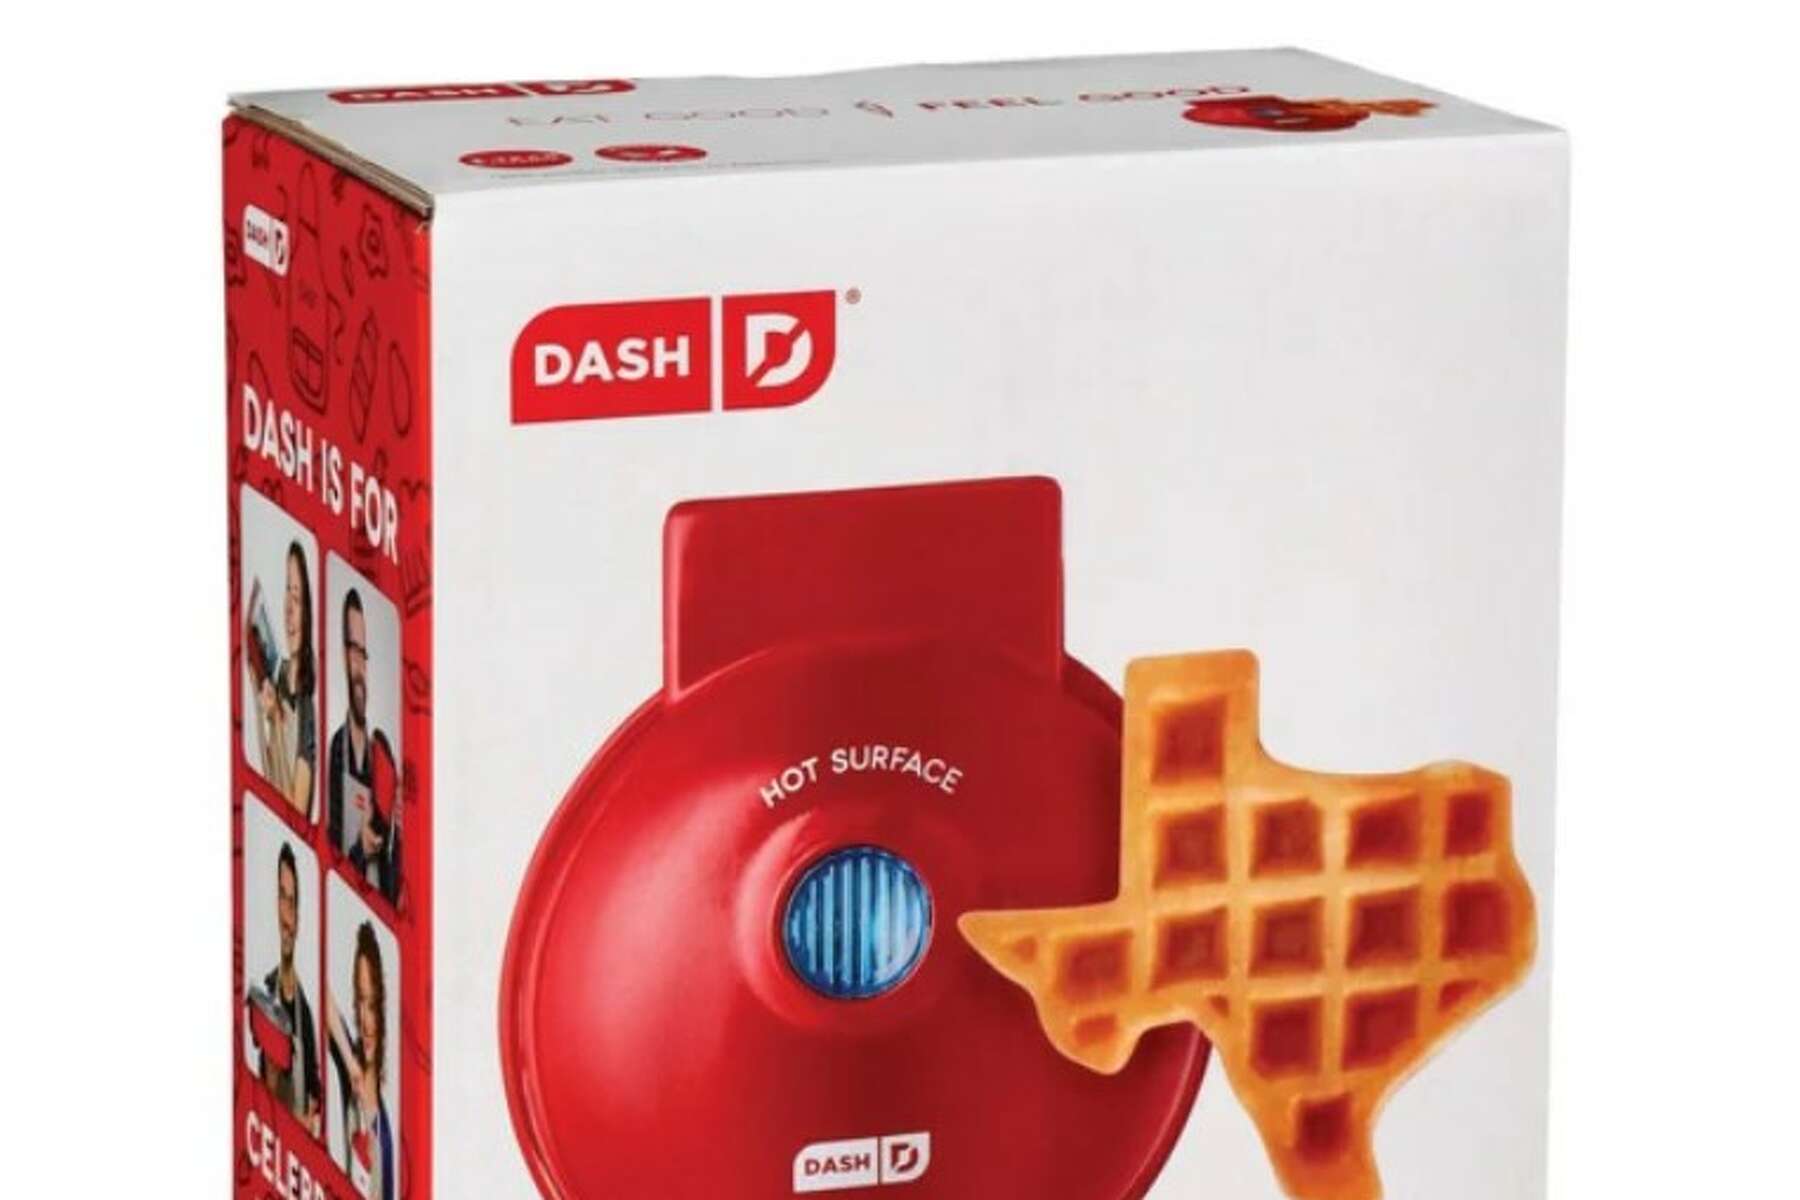 The Dash Mini Waffle Maker Everyone's Talking About